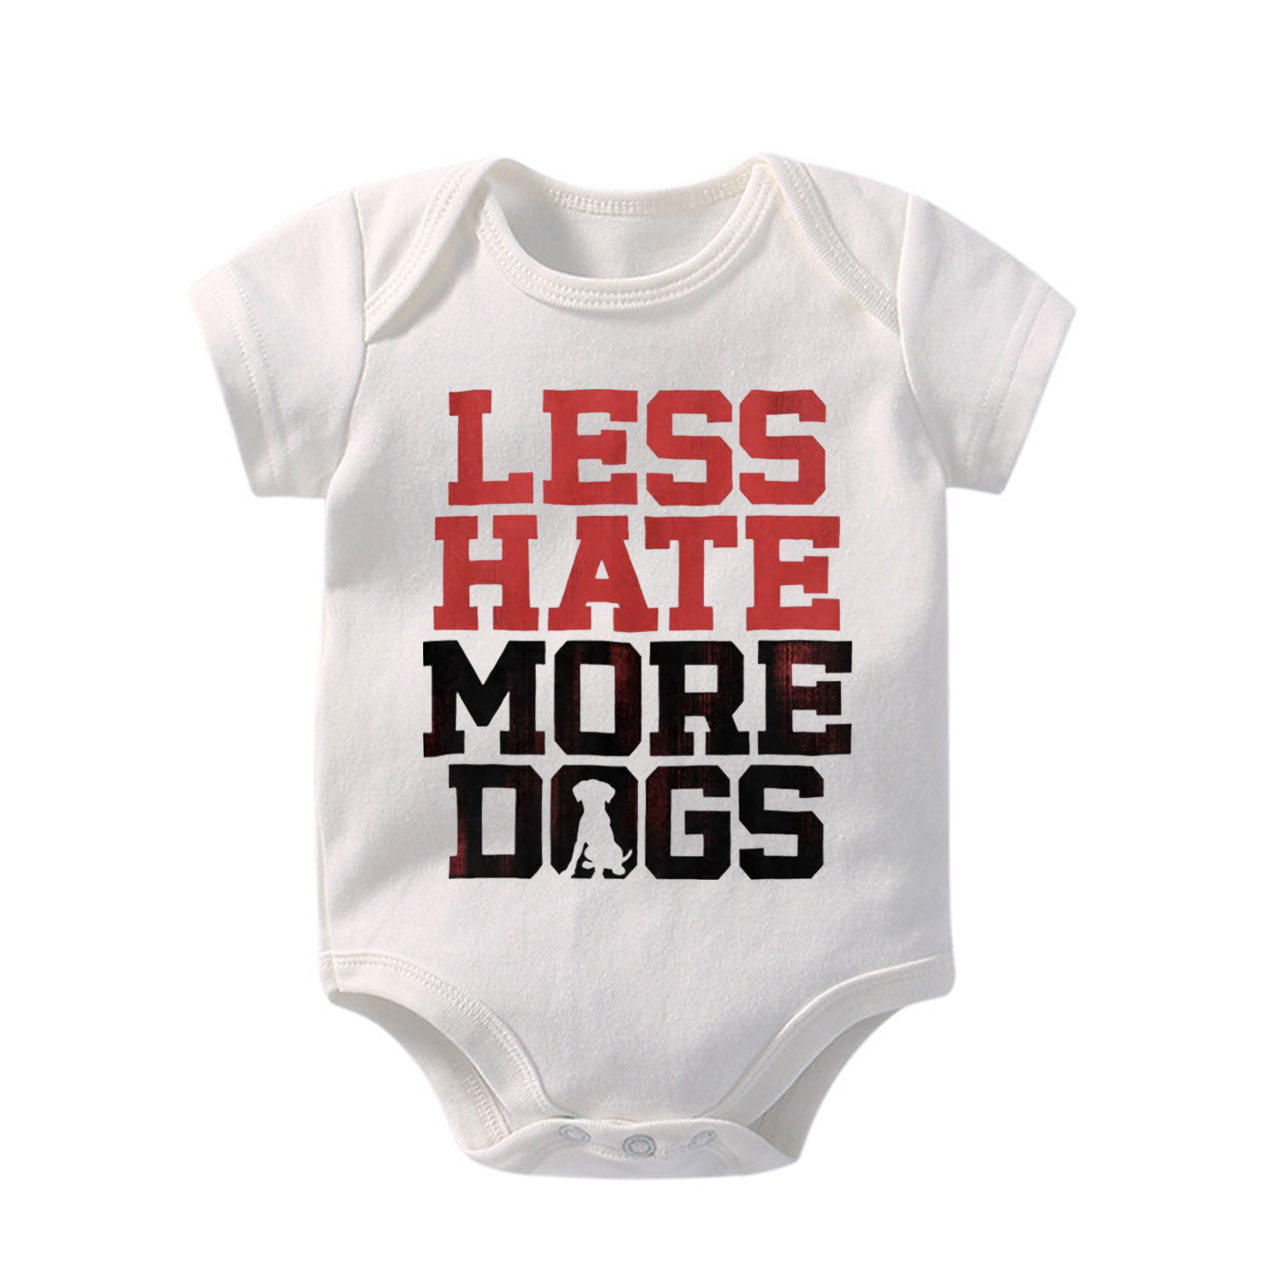 More Dogs Bodysuit For Baby